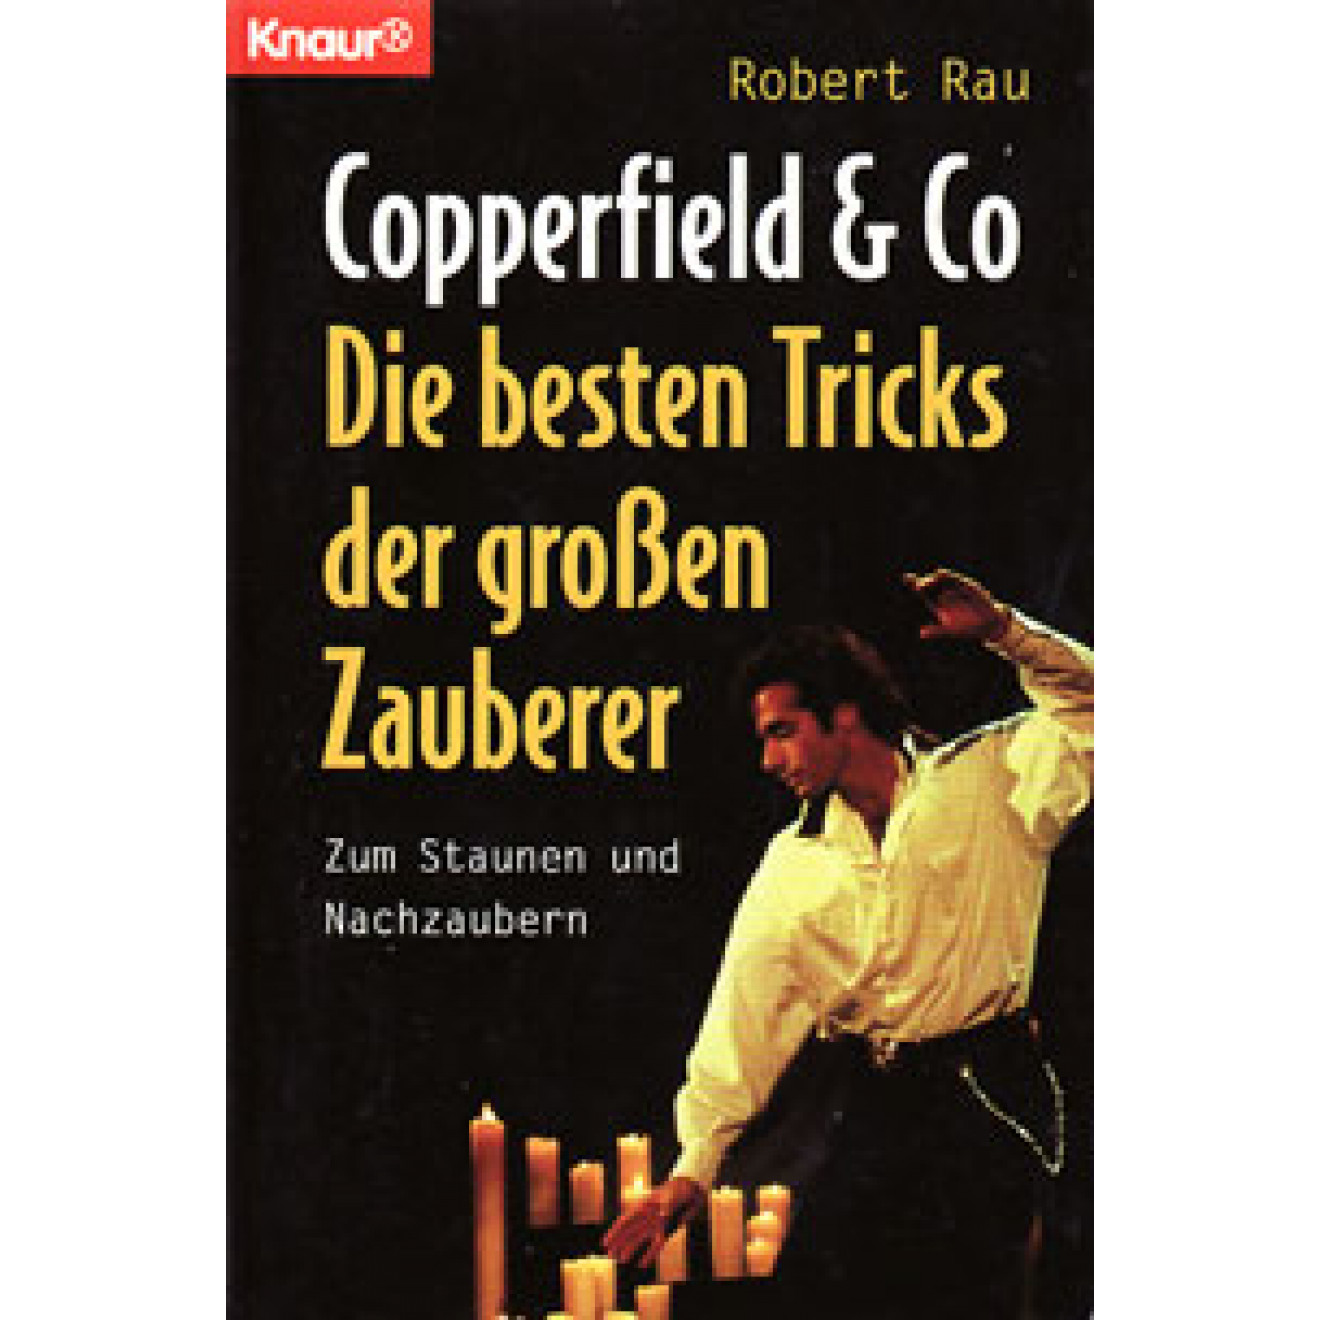 Copperfield & Co